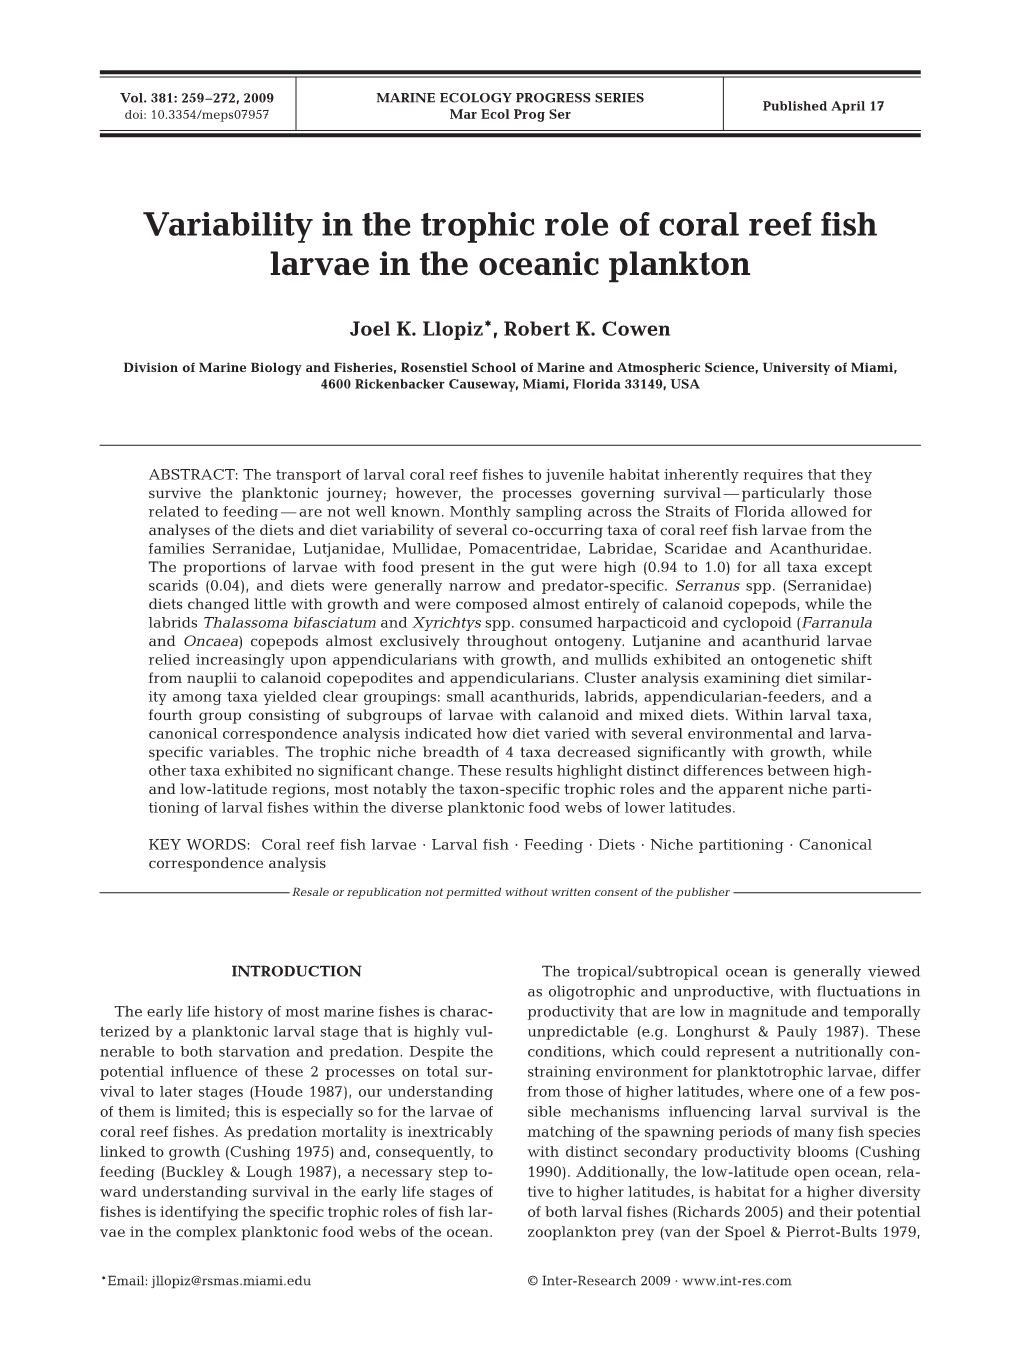 Variability in the Trophic Role of Coral Reef Fish Larvae in the Oceanic Plankton